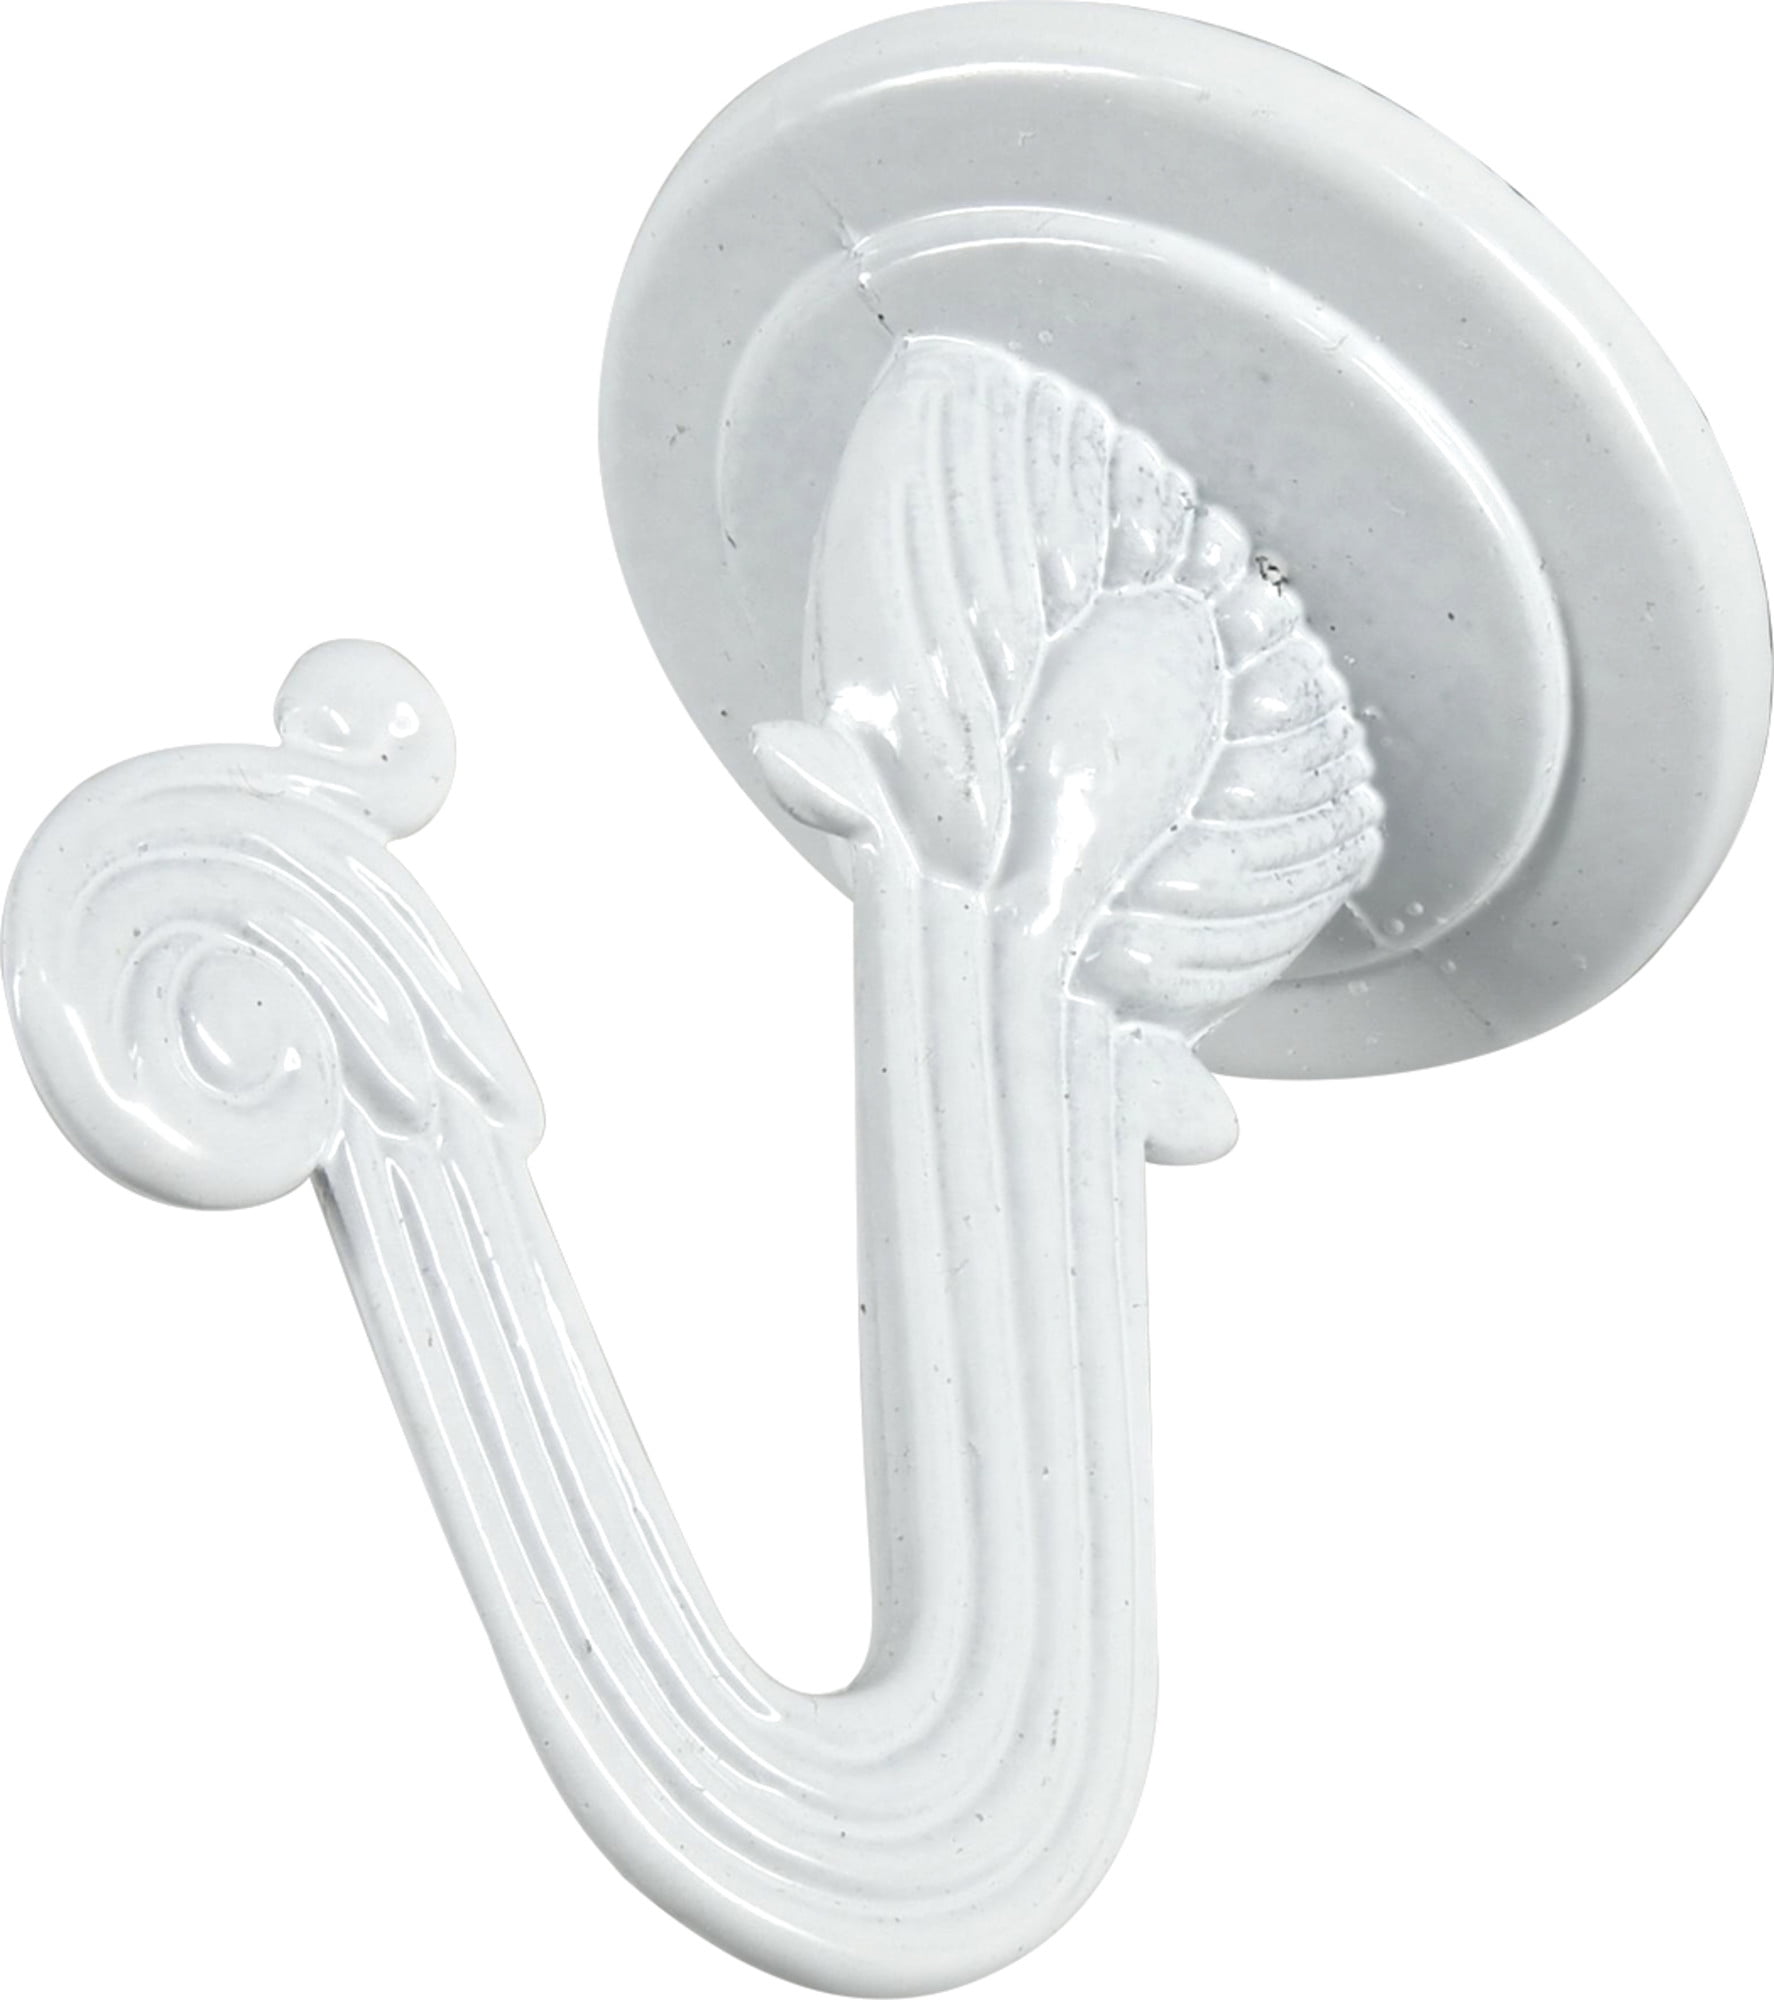 8 Sets Ceiling Hooks For Hanging Plants White Heavy Duty